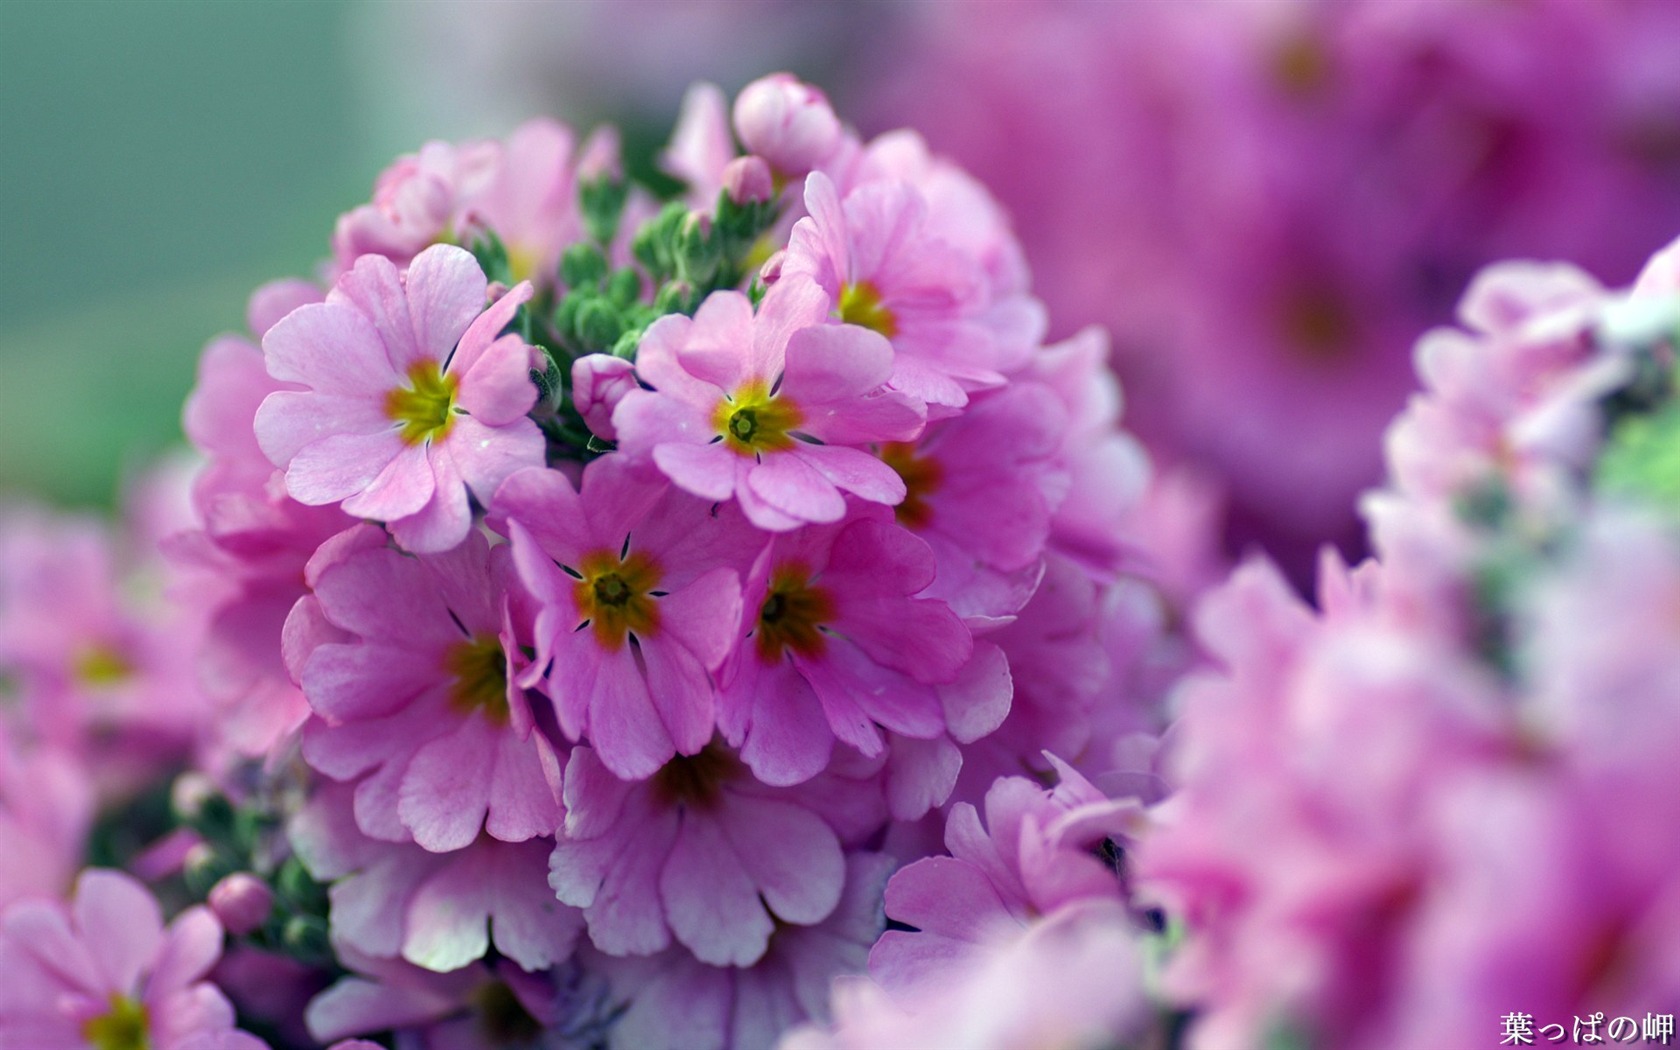 Personal Flowers HD Wallpapers #21 - 1680x1050